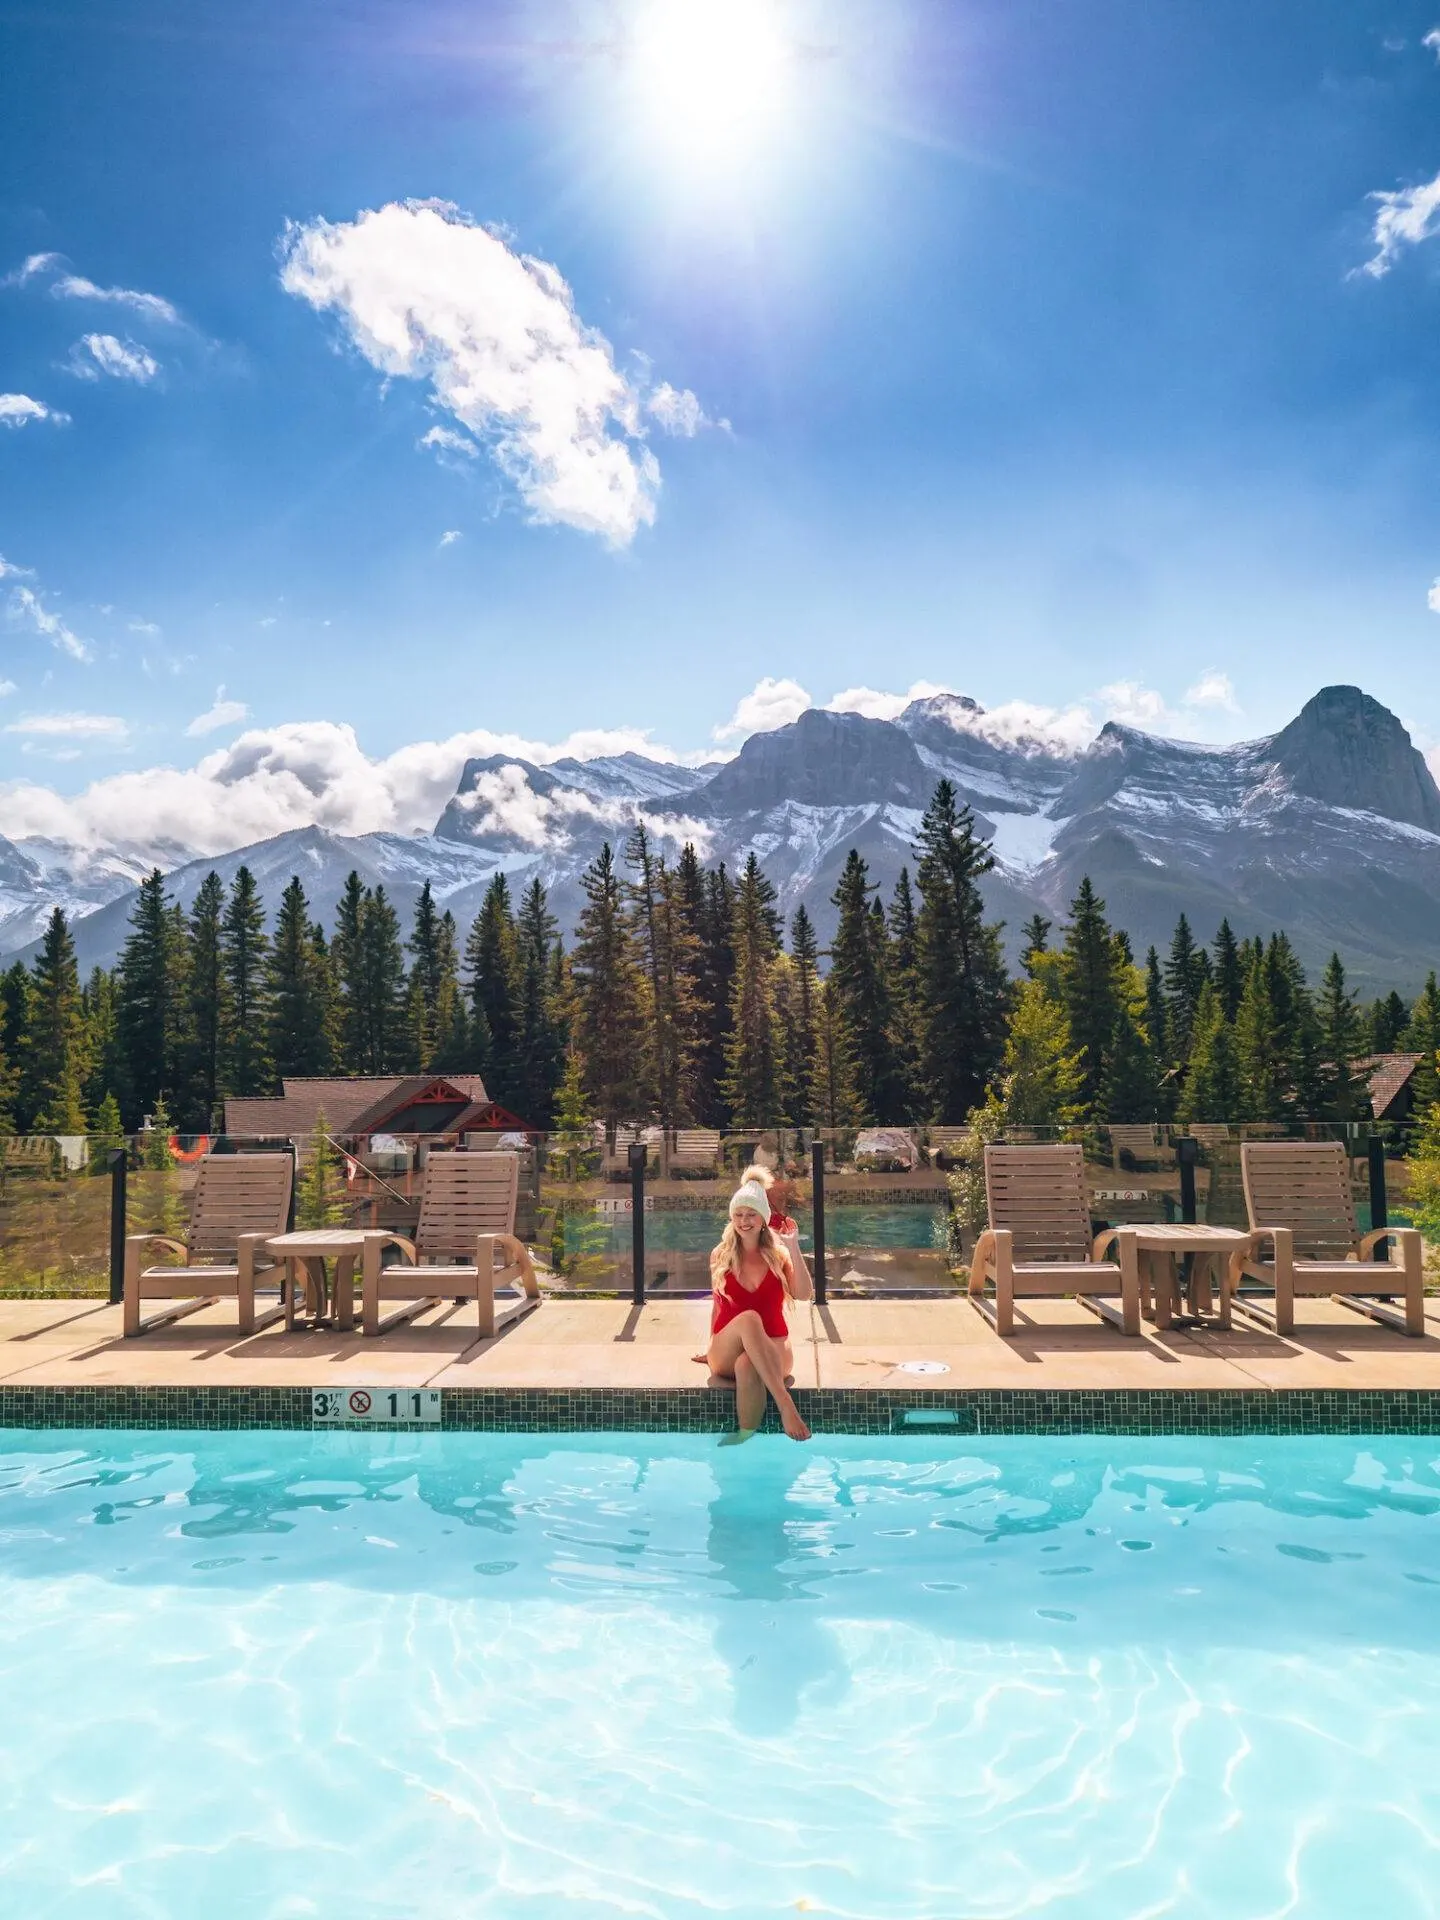 Visiting Banff National Park soon? Don't miss this guide of the 50 best things to in Banff for every kind of traveler! I recently spent 8 days exploring the area and took notes along the way so I could write you the most comprehensive guide possible. This guide includes all the top attractions, hikes, restaurants, and sights you definitely won't want to miss when you visit Banff National Park. I also include any tips you might need when visiting the area! Pictured here: Staying at the Malcolm Hotel in Canmore will save you money